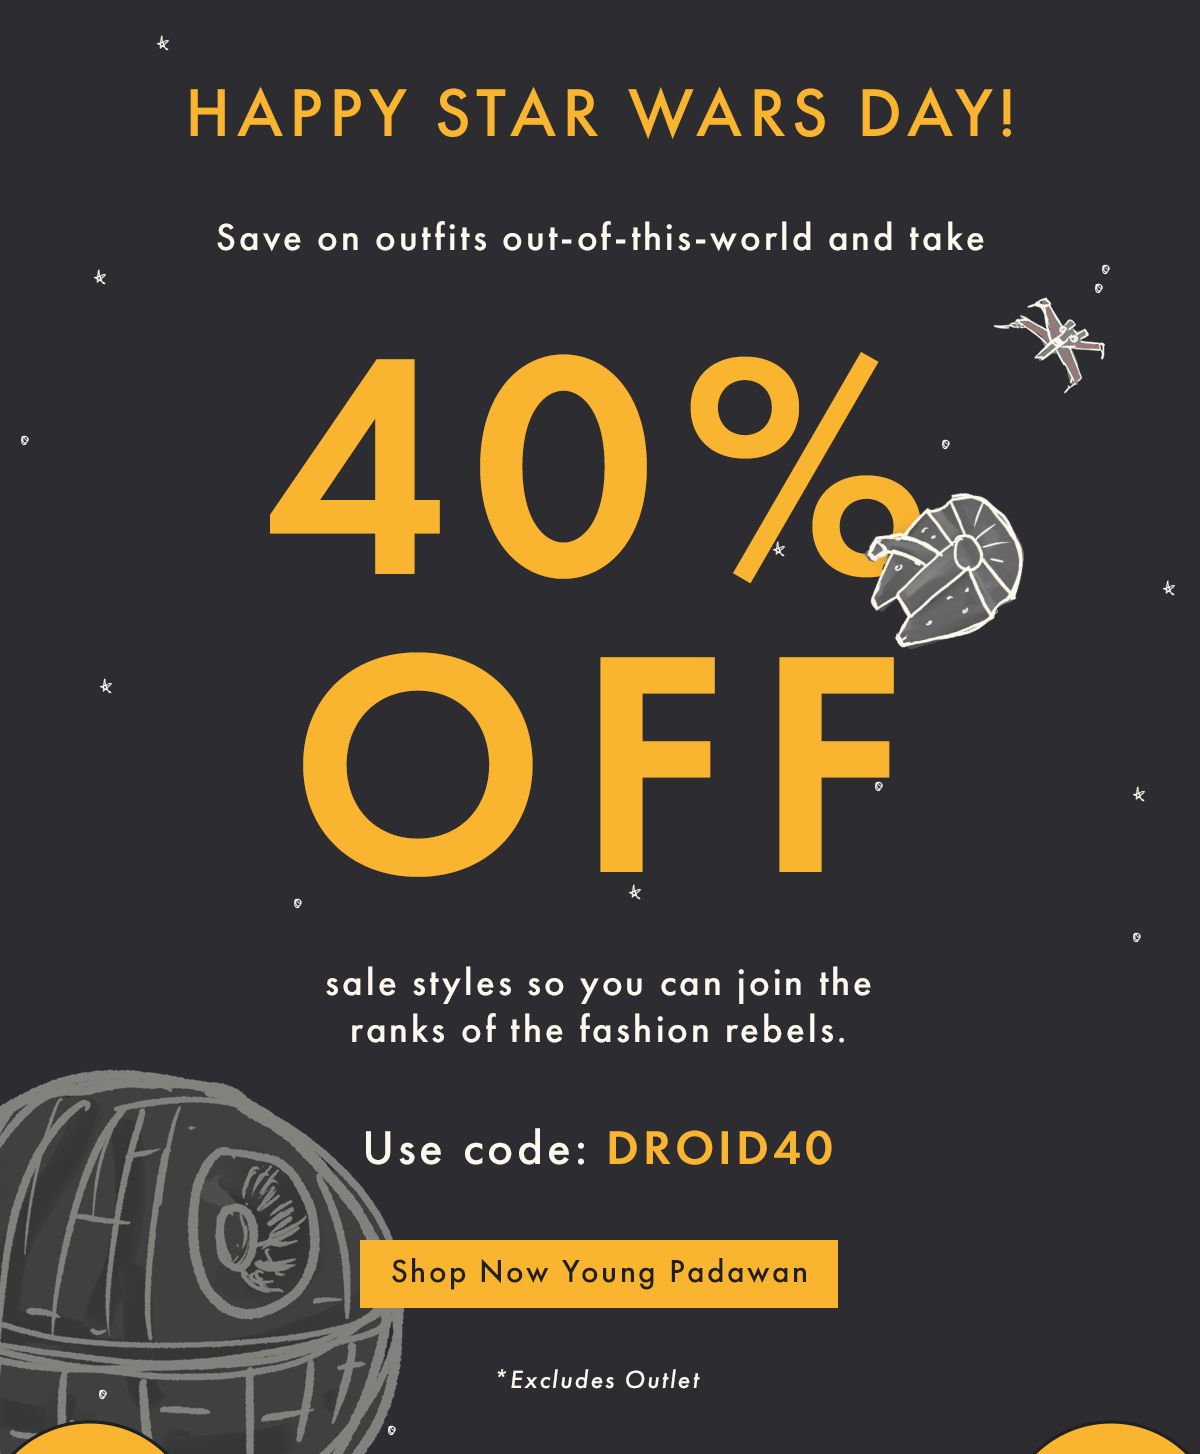 Happy Star Wars Day! | Shop Now Young Padawan